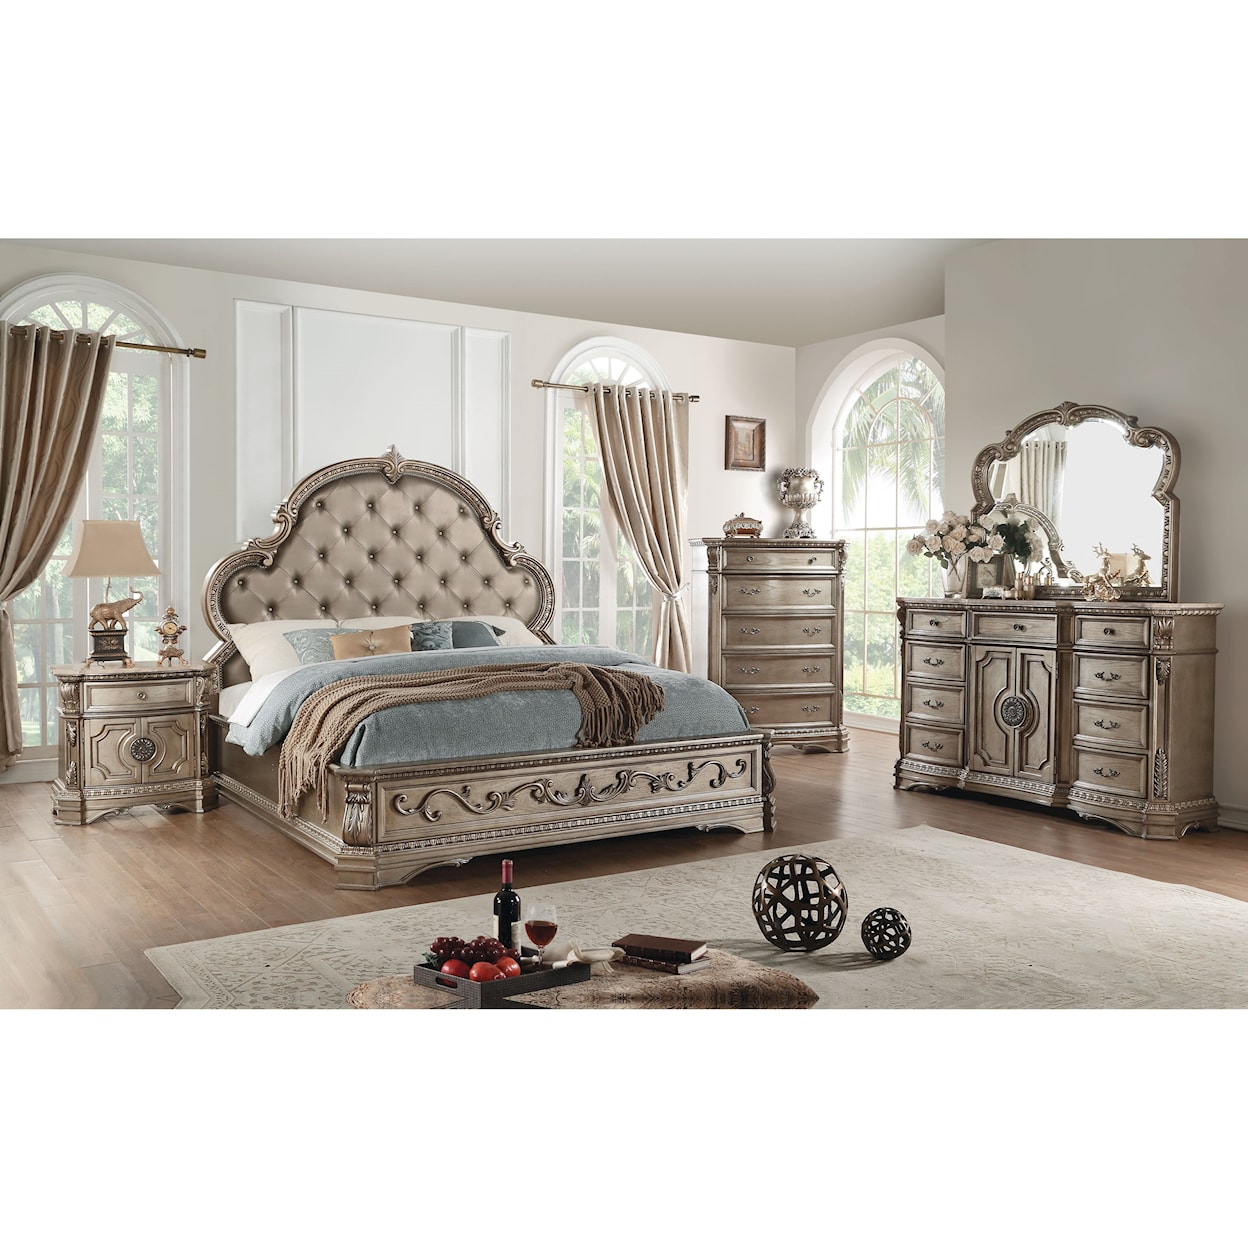 Acme Furniture Northville Queen Bed